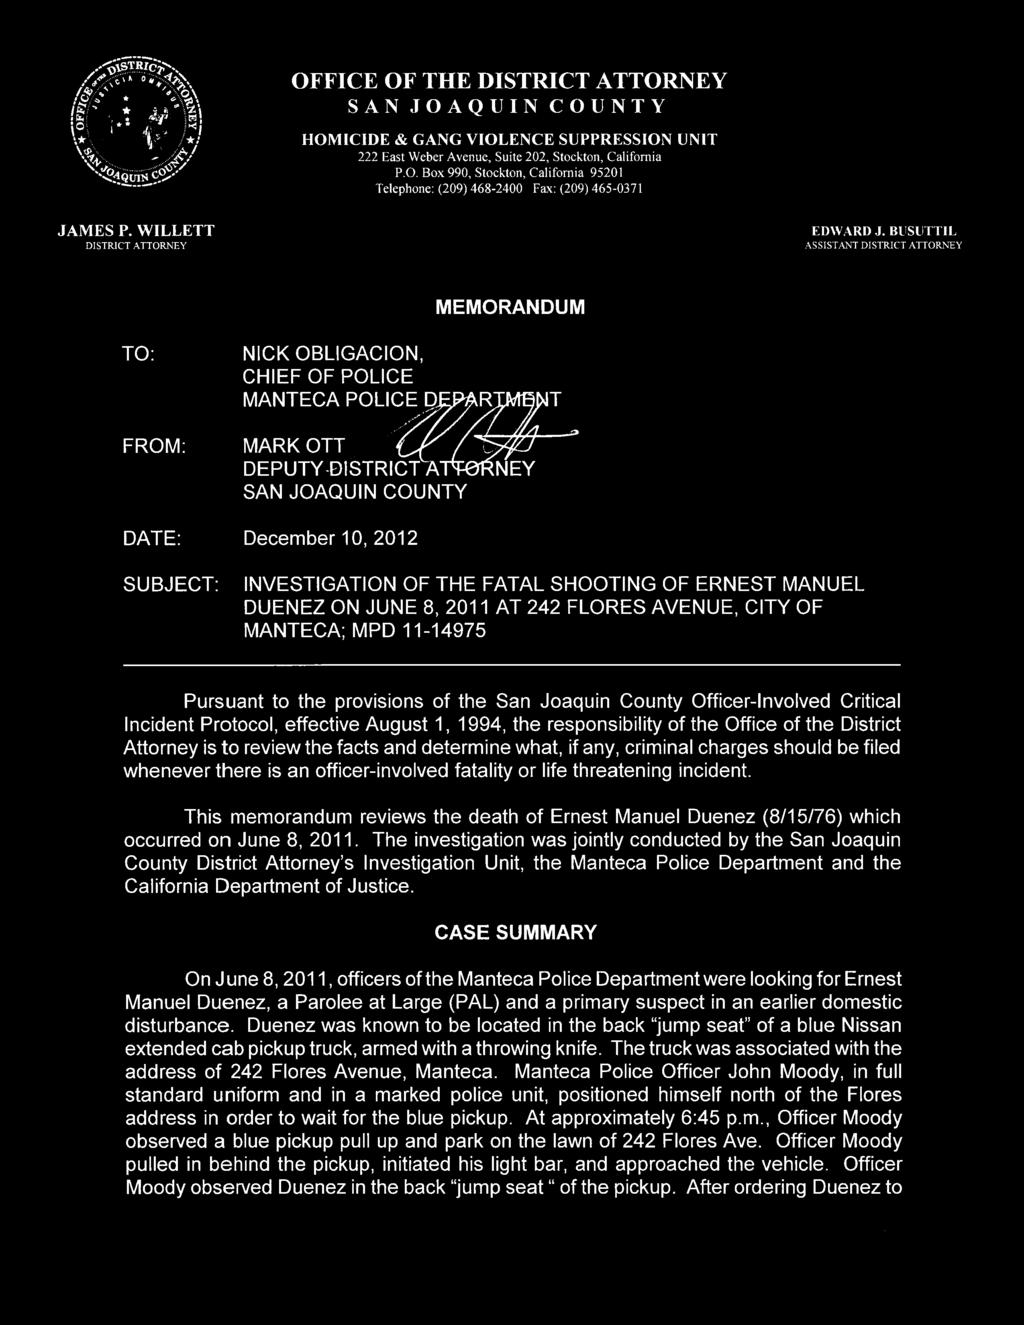 BUSUTTIL ASSISTANT DISTRICT ATTORNEY MEMORANDUM TO: NICK OBLIGACION, CHIEF OF POLICE MANTECA POLICED R T FROM: MARK OTT DEPUTY-~1STRICT A SAN JOAQUIN COUNTY NEY DATE: December 10, 2012 SUBJECT: